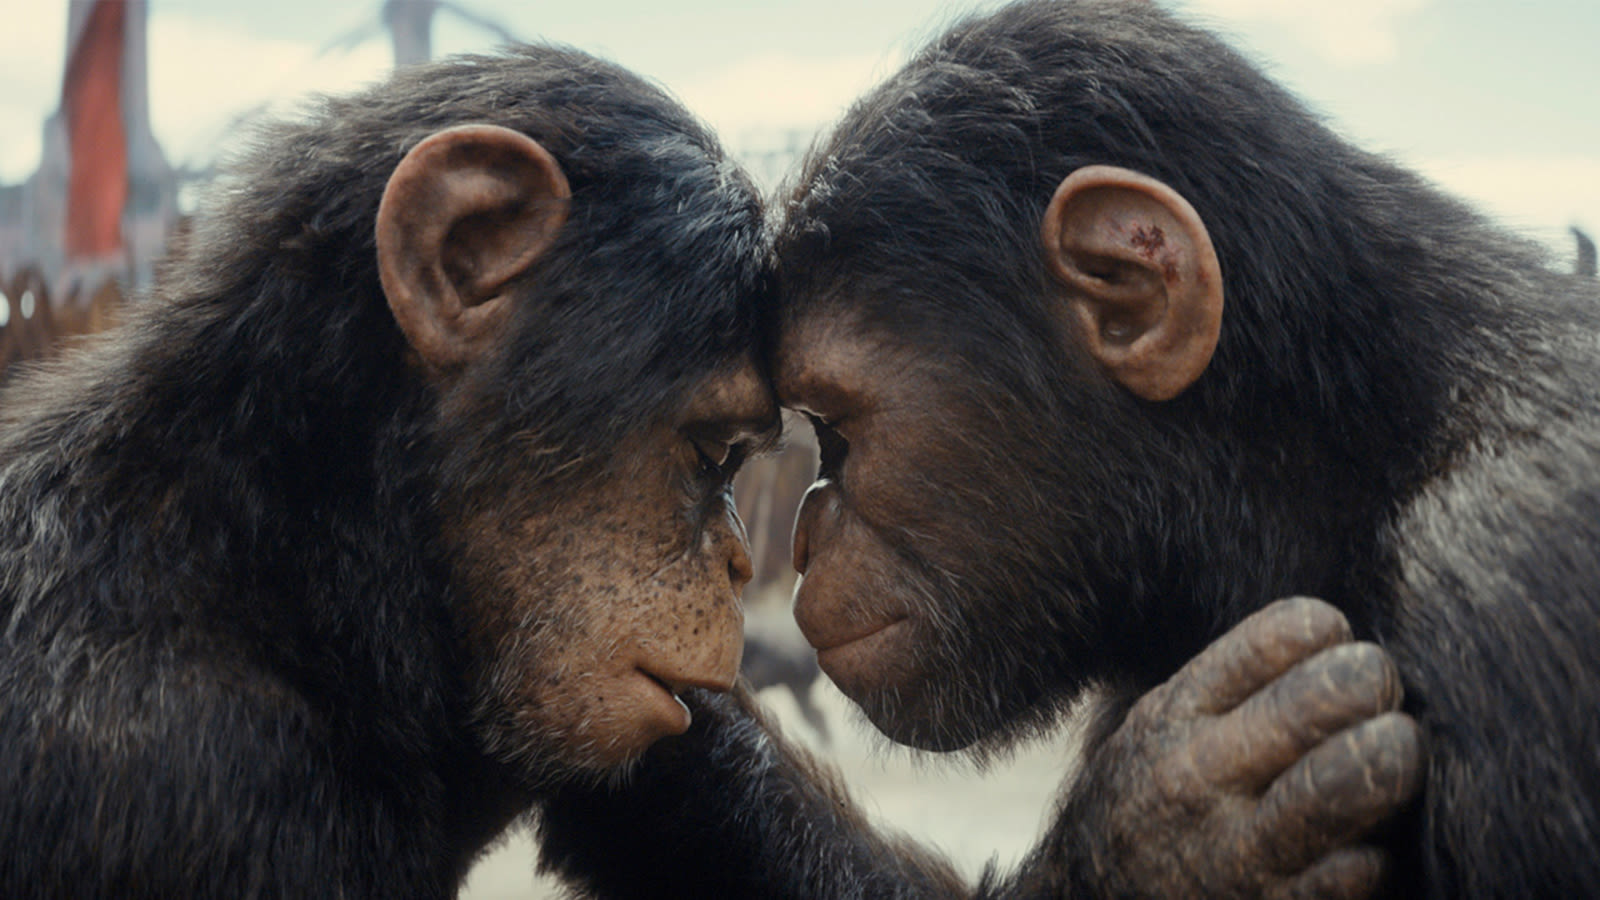 'Kingdom of the Planet of the Apes' actor says character is 'metaphor for evolution'